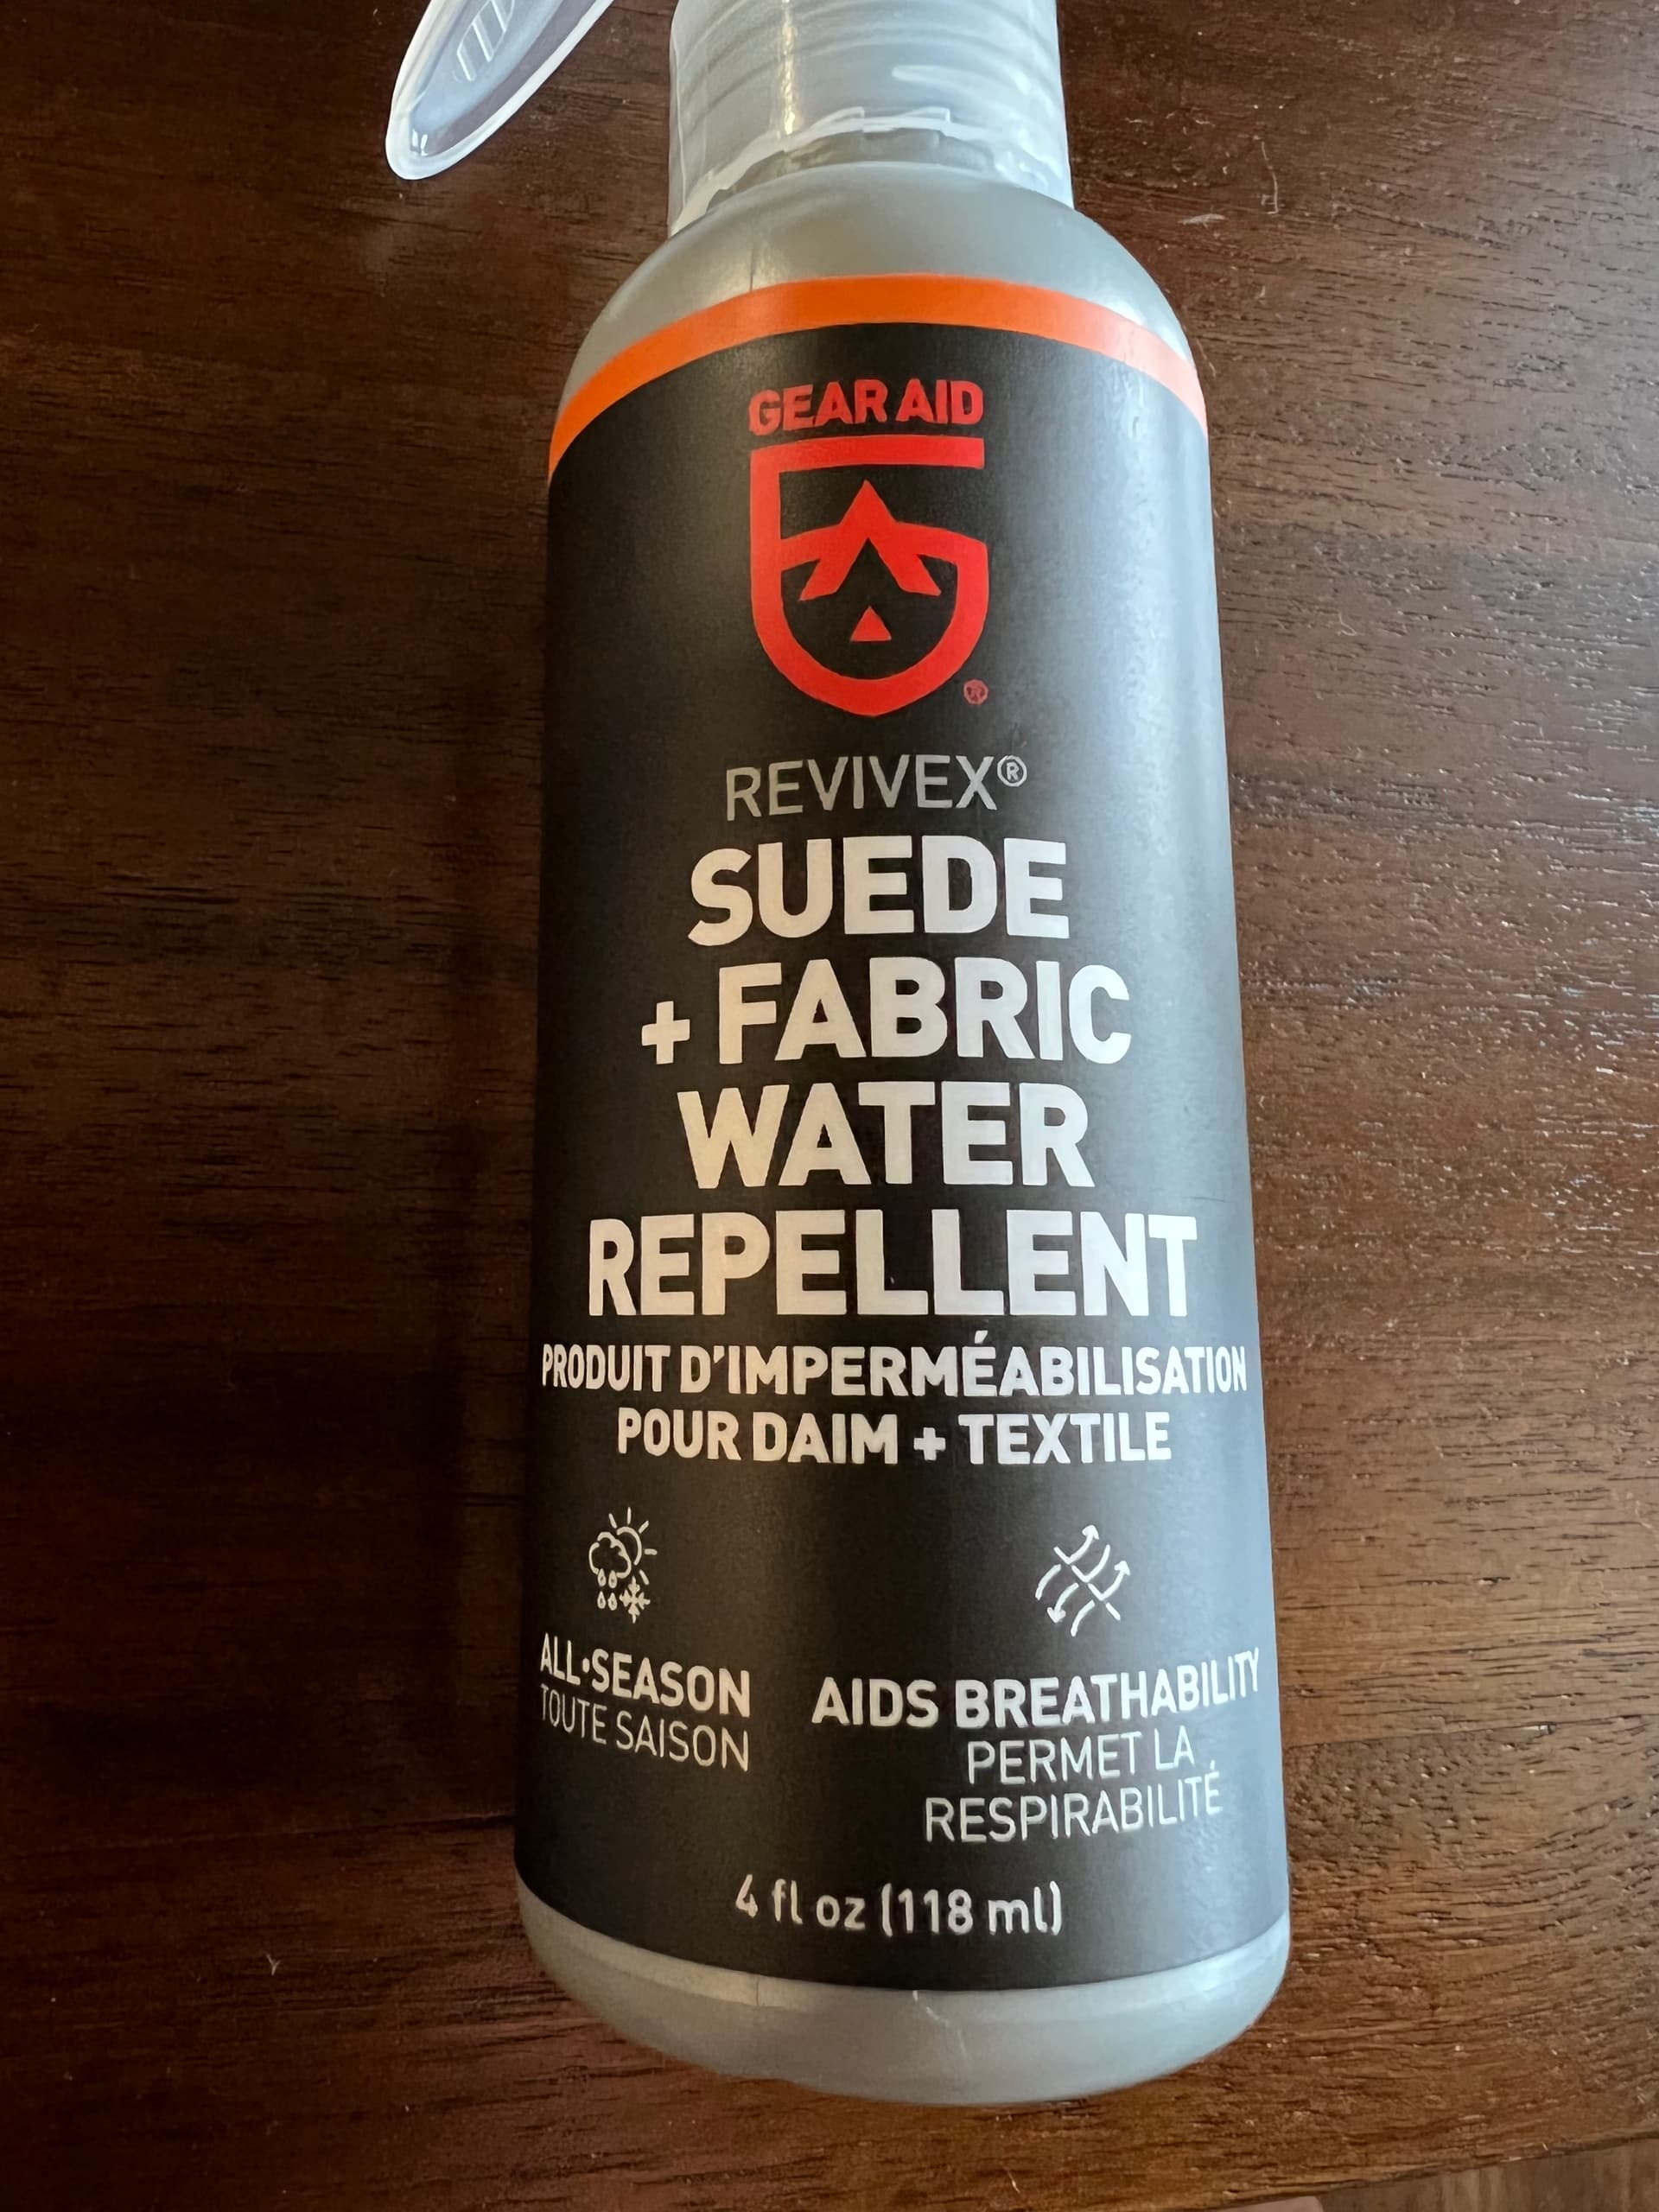 Gear Aid Improved Revivex Durable Water Repellent - 10 oz bottle